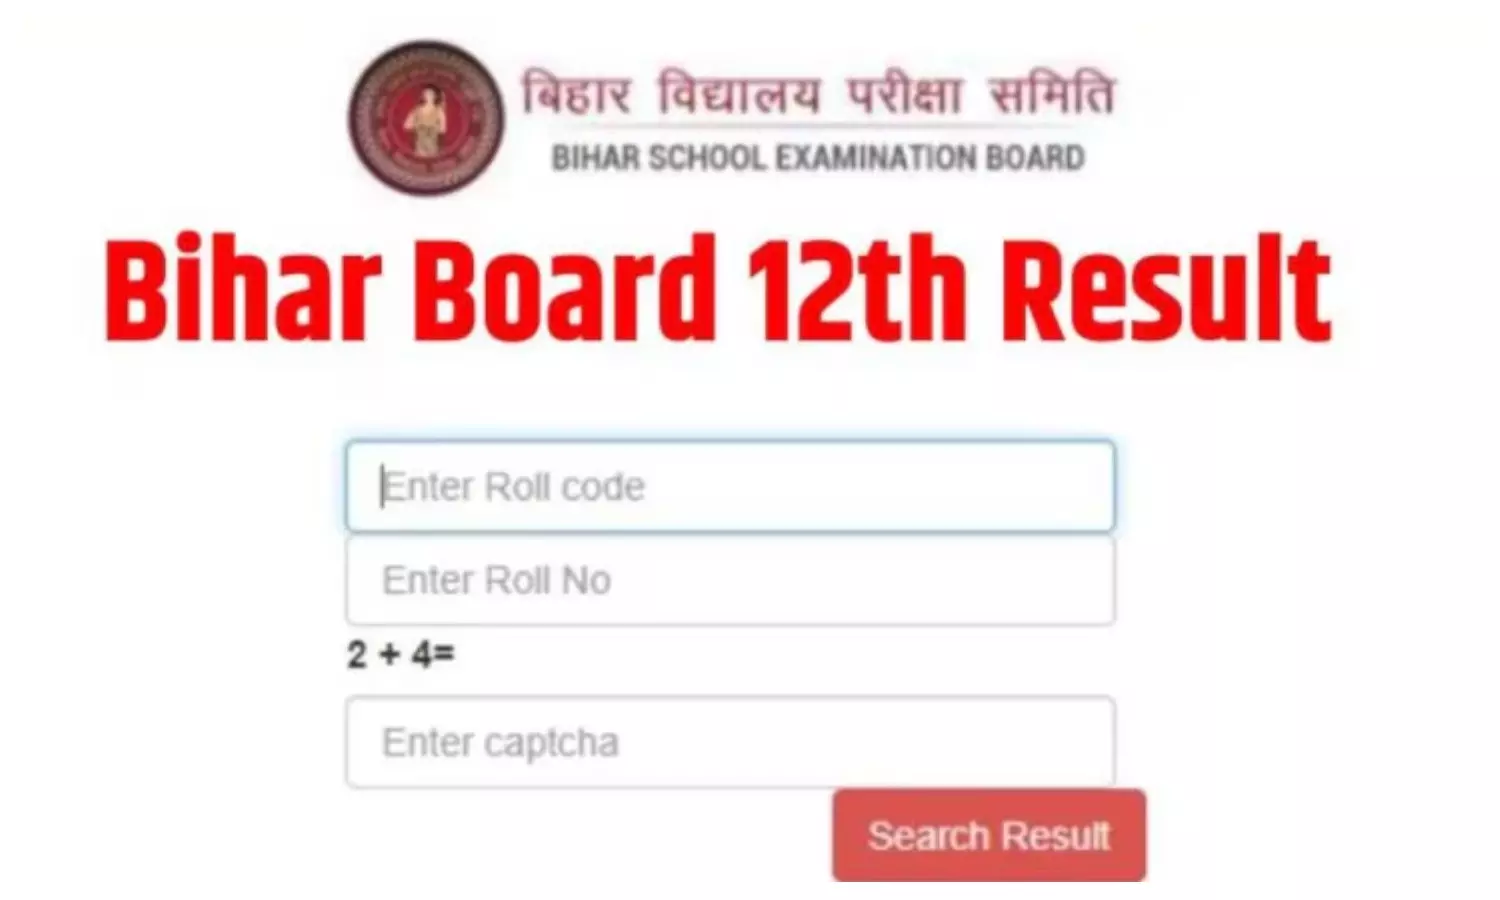 BSEB 12th Result 2024